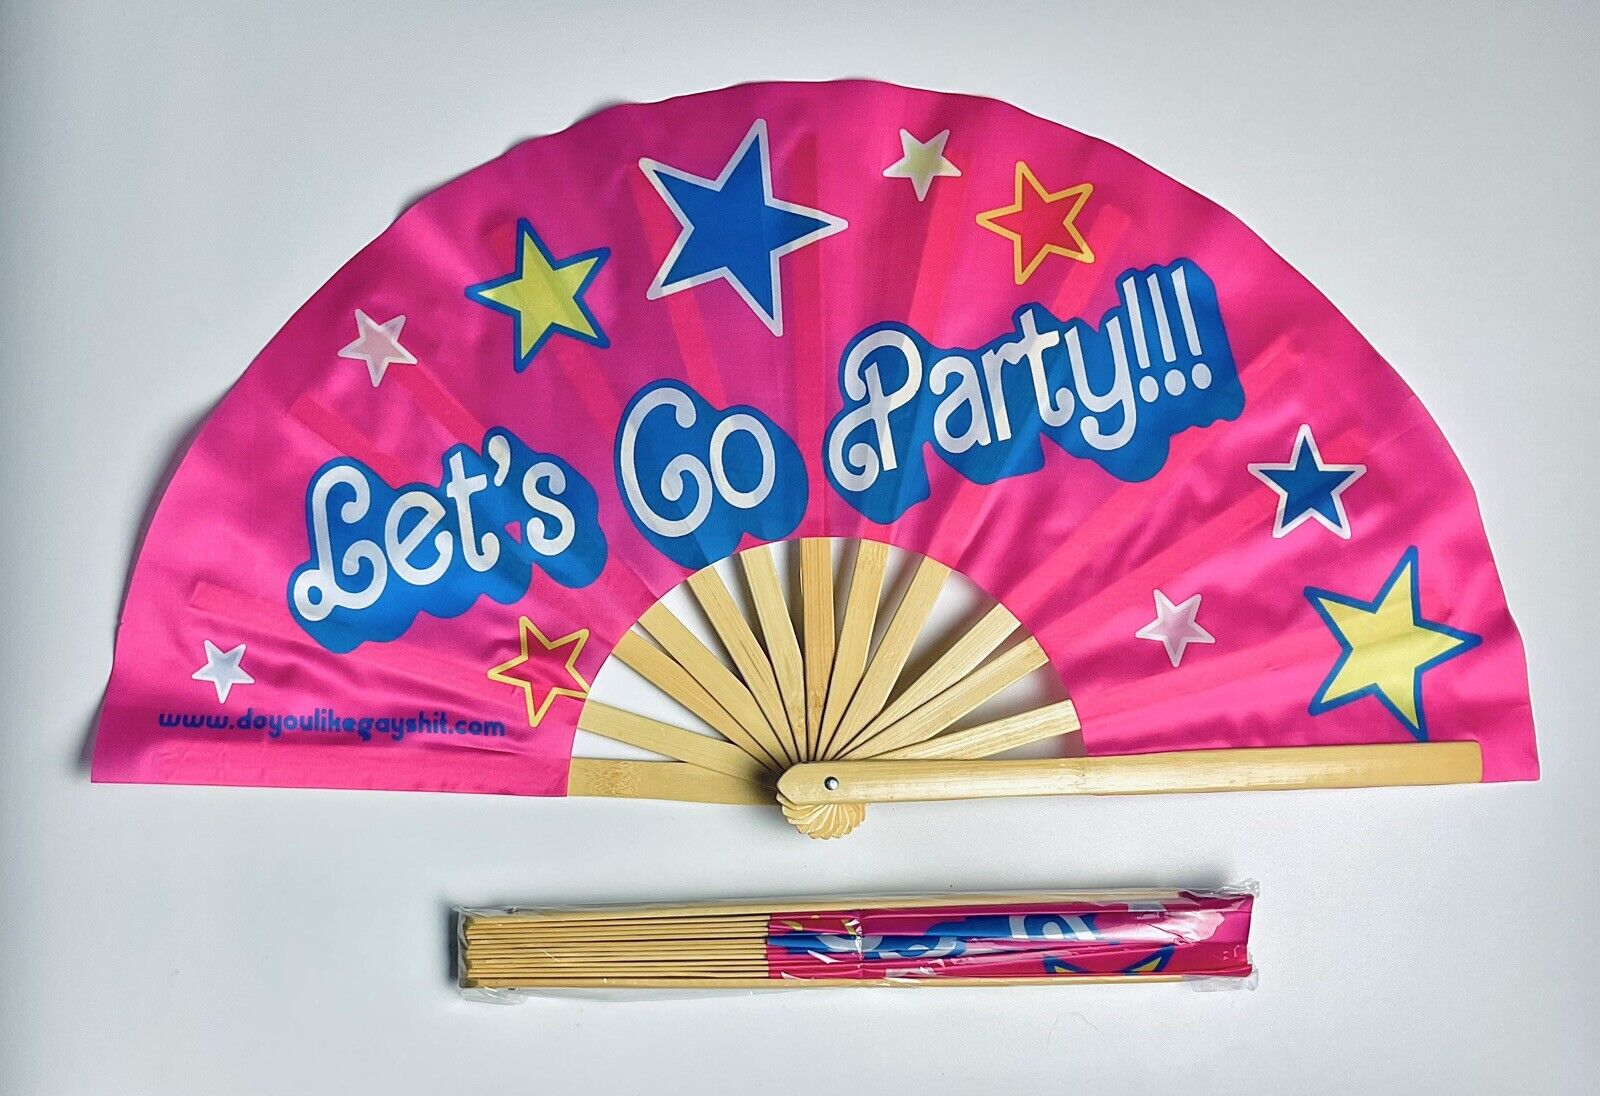 Let’s Go Party 26" Extra Large Folding Clack Gay Pride Fan Rave Barbie Funny Fun Do You Like Gay Shit?